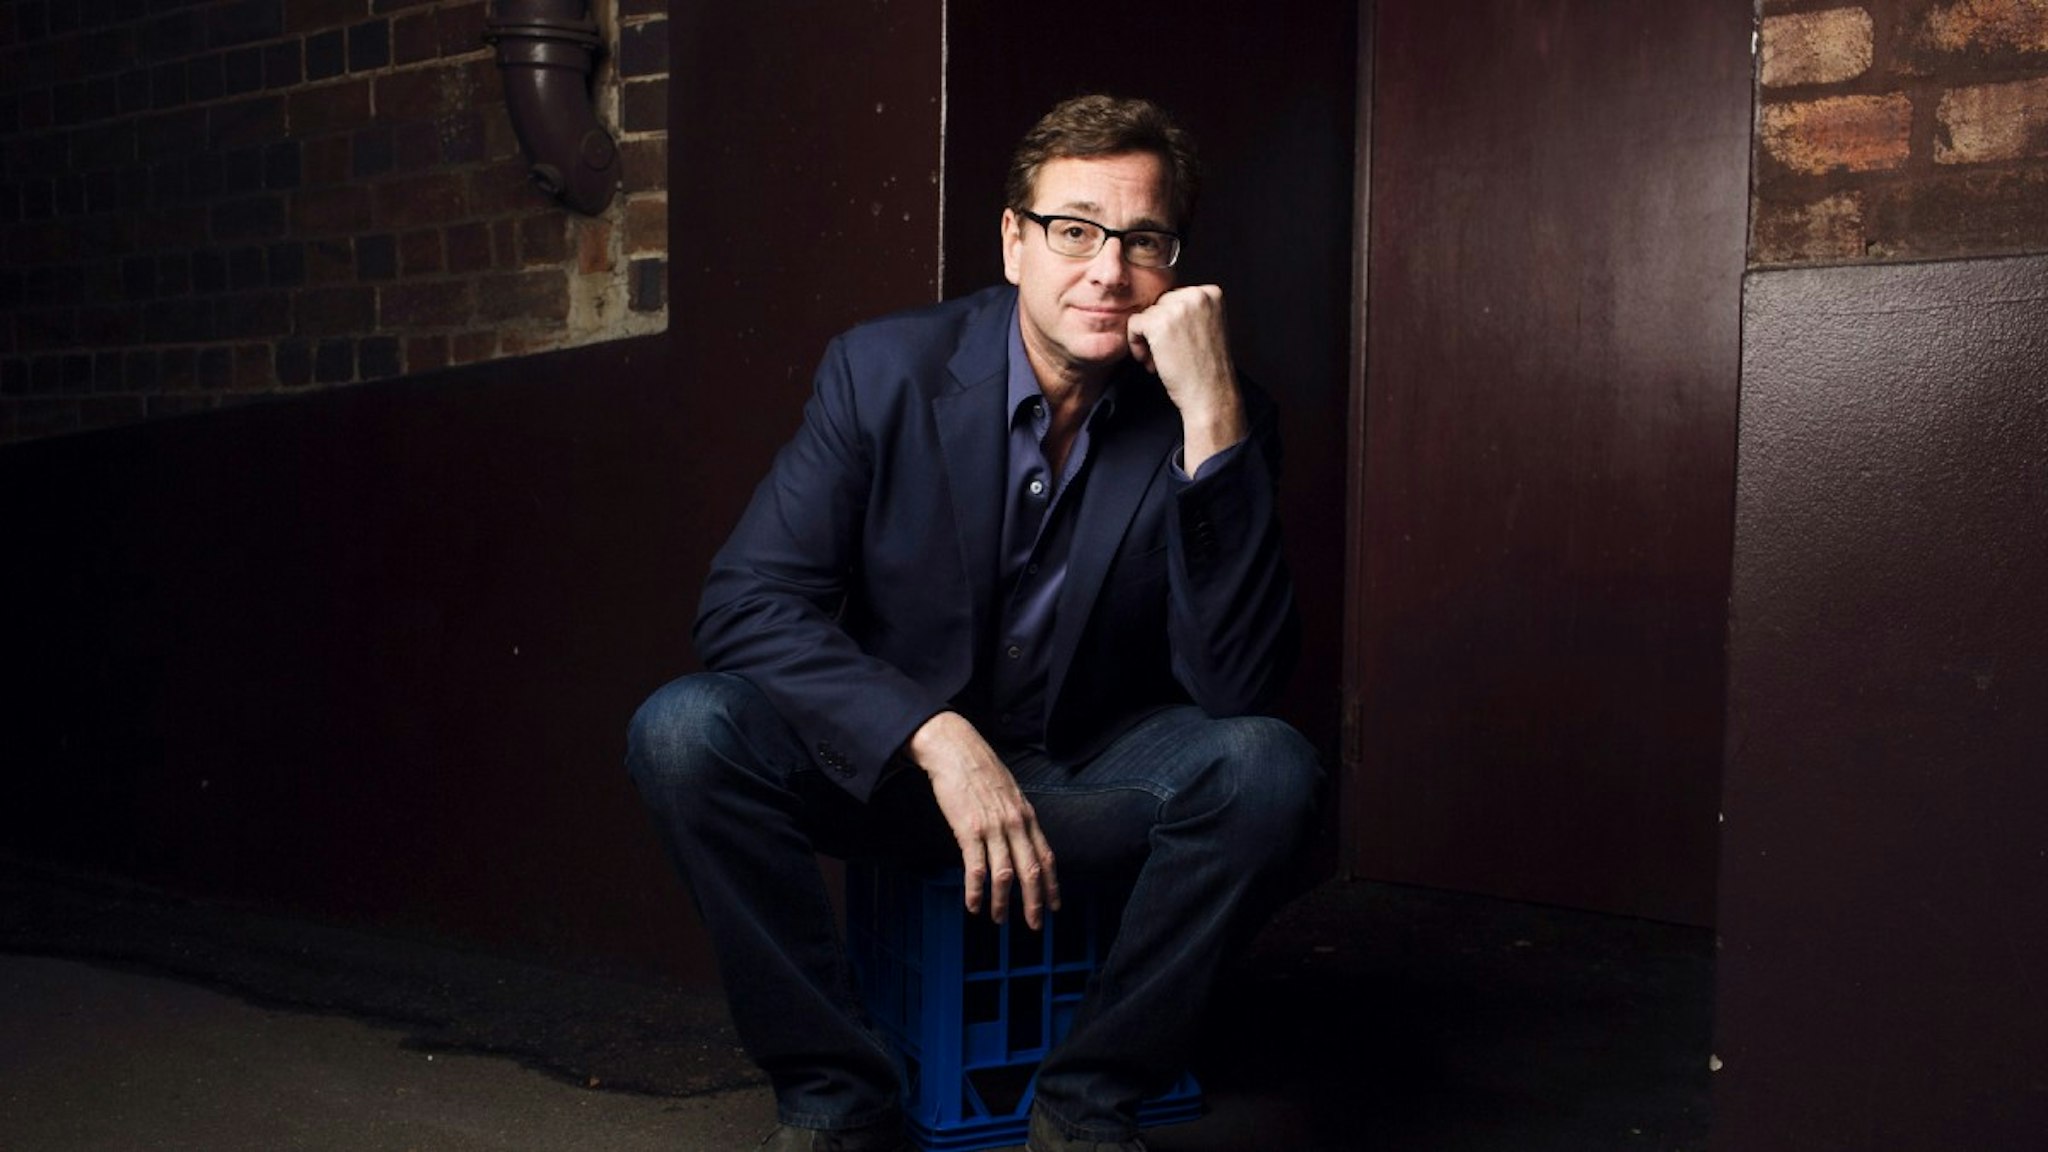 (AUSTRALIA OUT) U.S. comedian and actor, Bob Saget, is in Sydney ahead of a stand-up comedy show in Melbourne, May 13, 2014.